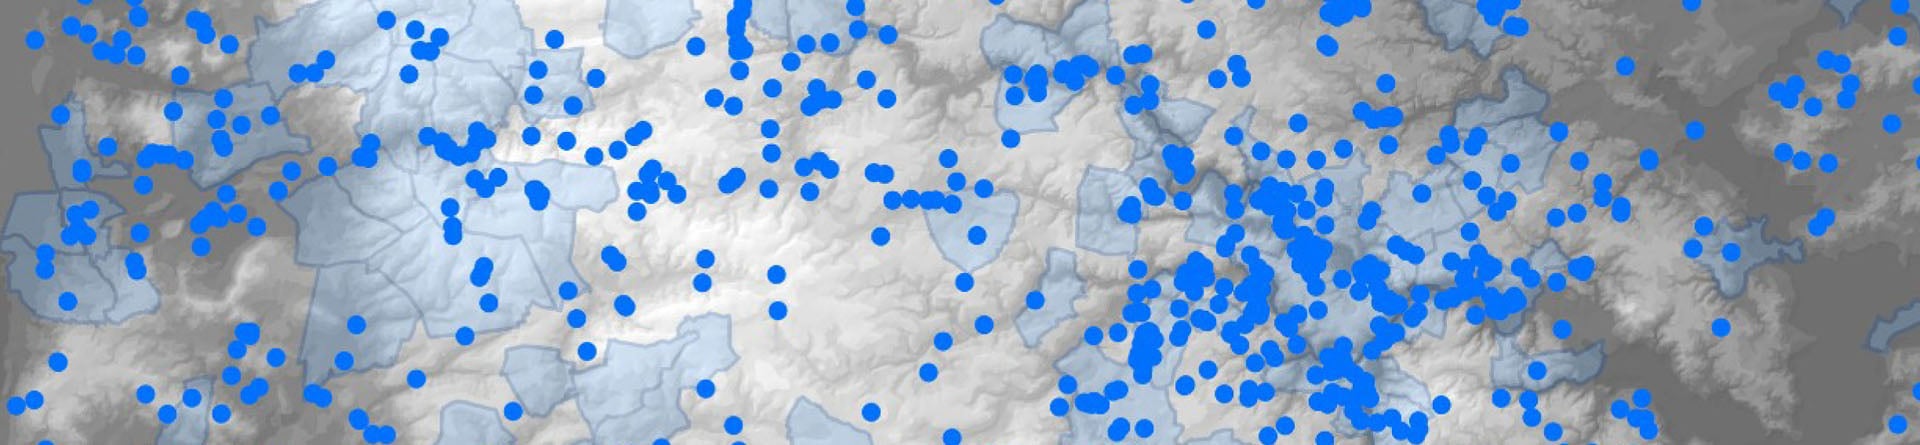 Extract from distribution map of Norfolk find-spots as blue dots on a stylised background